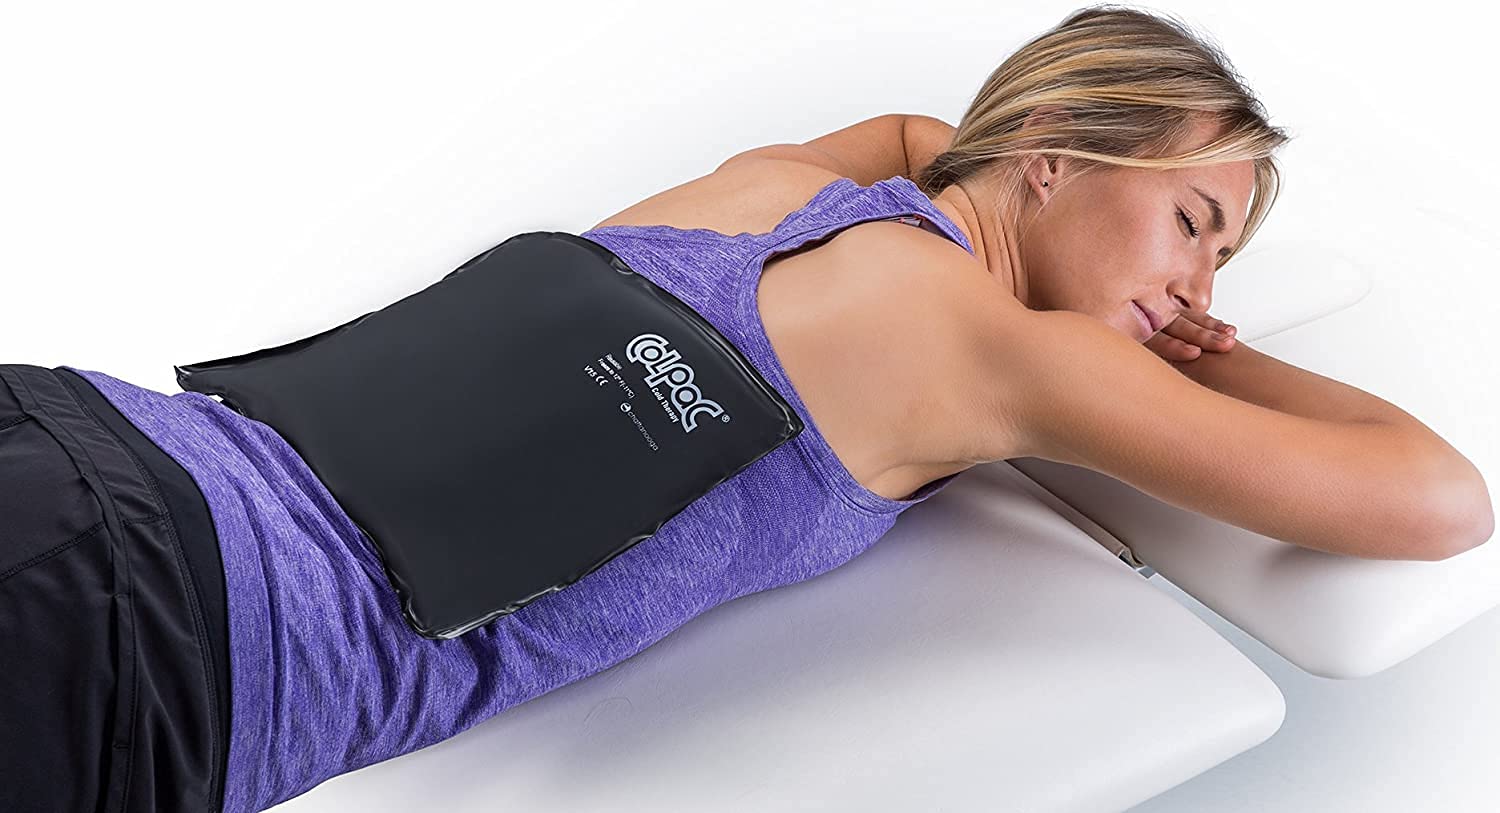 Chattanooga ColPac - Reusable Gel Ice Pack - Black Polyurethane - Standard - 10 in x 13.5 in - Cold Therapy - Knee, Arm, Elbow, Shoulder, Back - Aches, Swelling, Bruises, Sprains, Inflammation